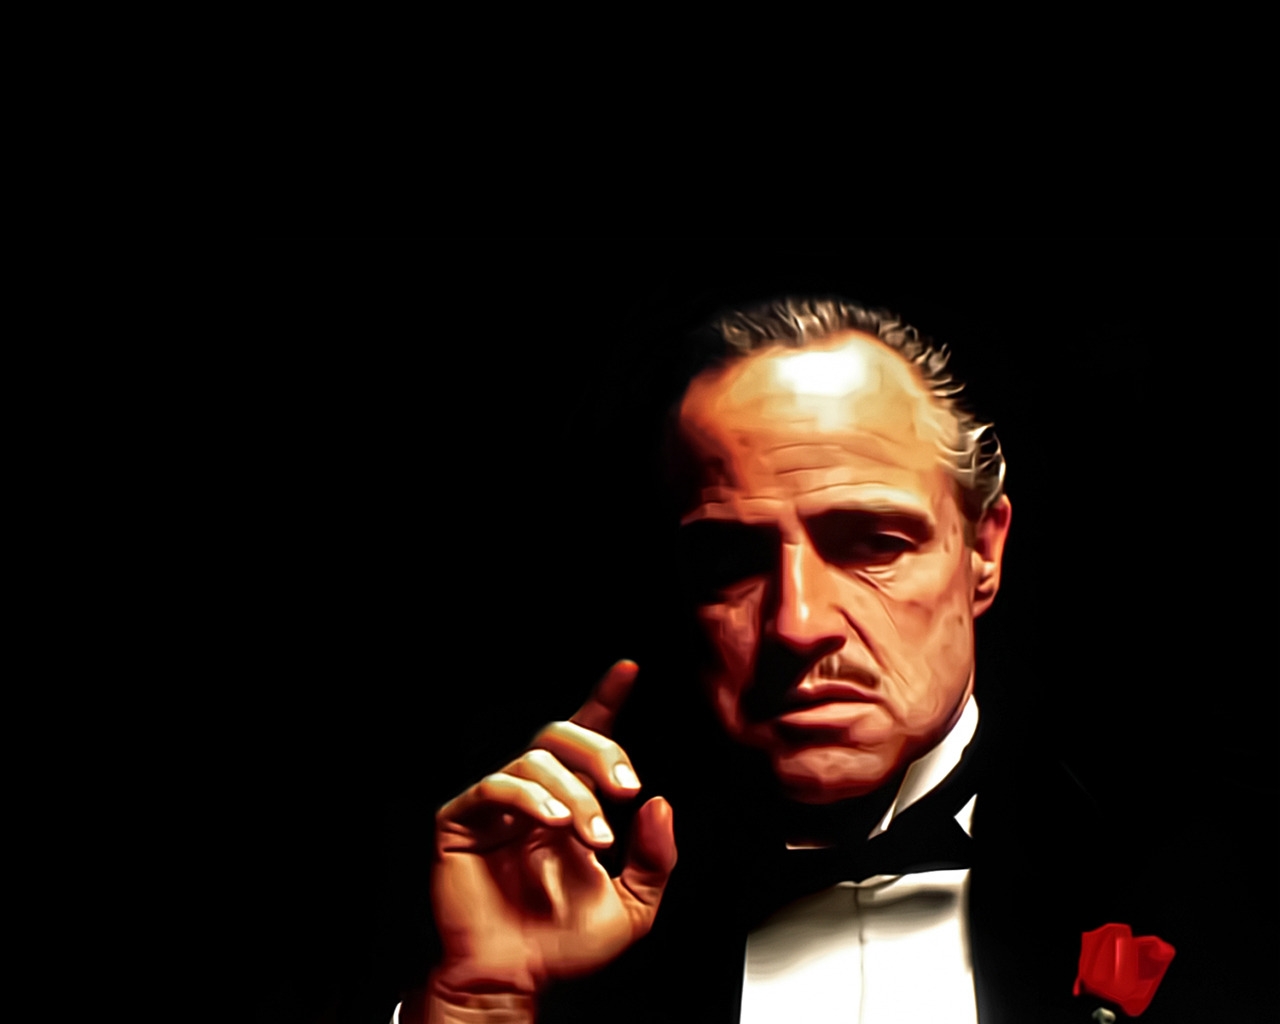 The Godfather Painting for 1280 x 1024 resolution